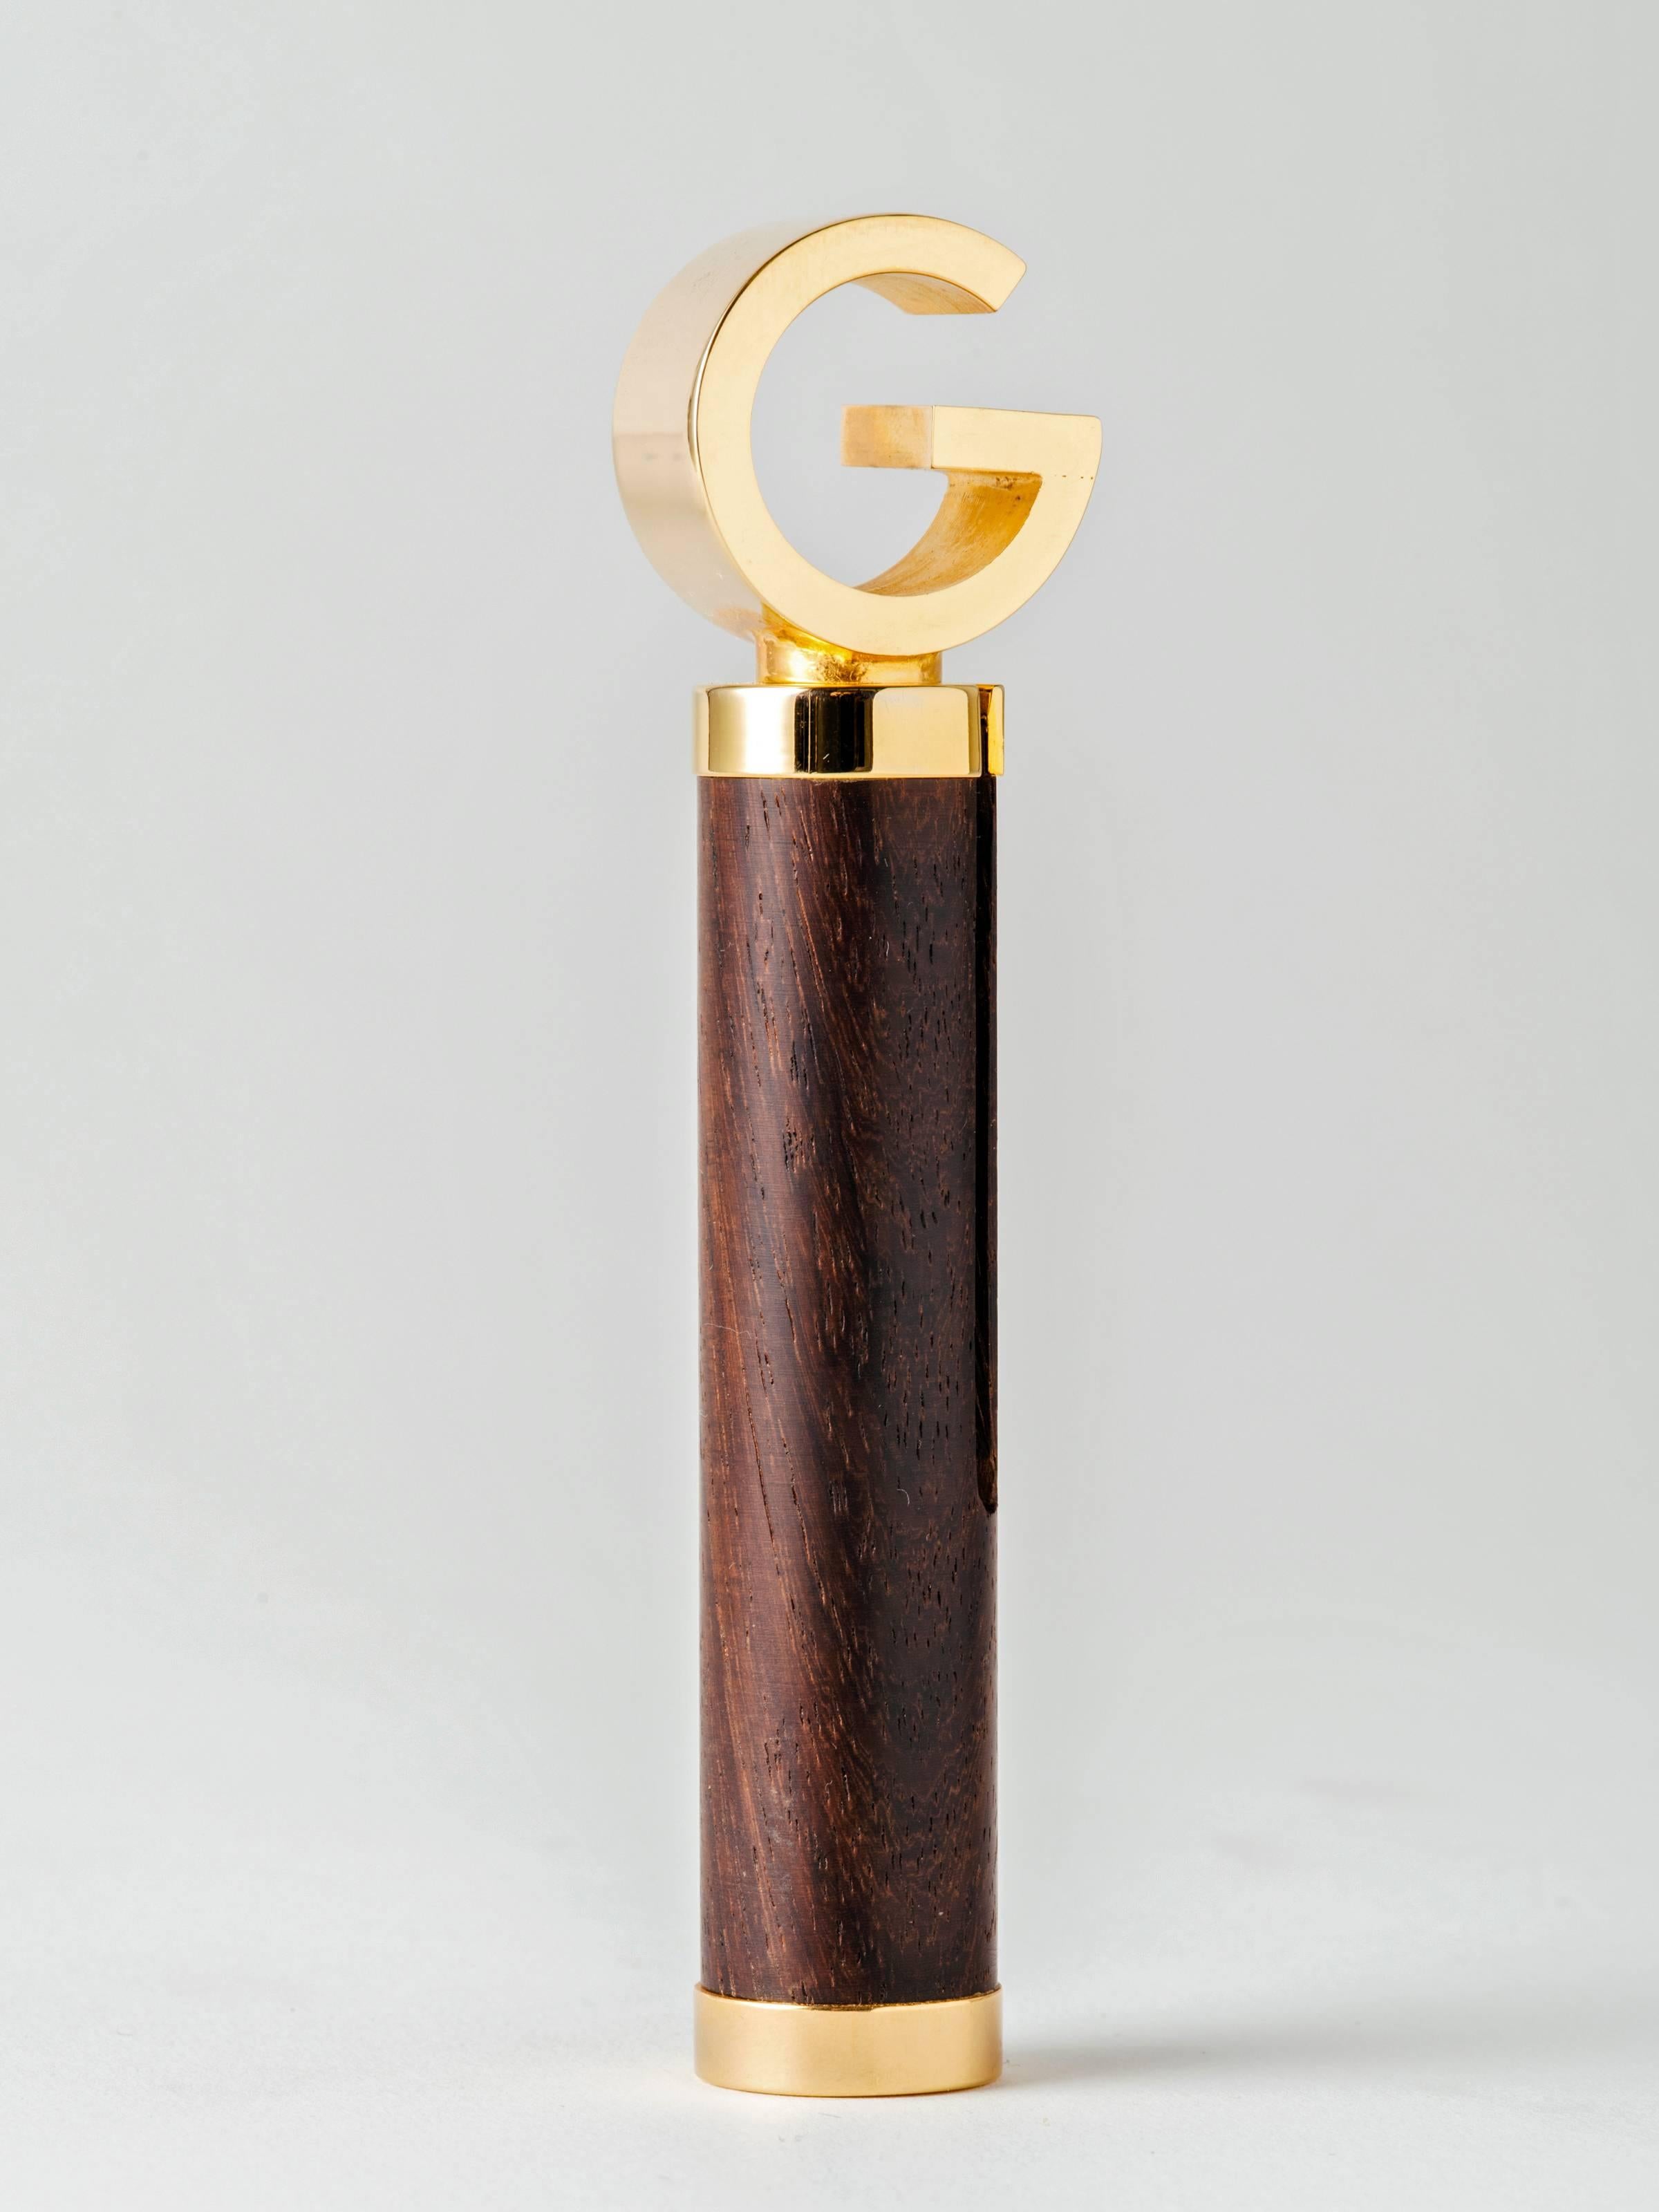 An ingeniously-designed, roundlet-style corkscrew or bottle opener executed in exotic wood and gold plated brass by Gucci, Italy, 1960s. The luxury brand's iconic G logo unscrews from the wood cylinder and slides precisely over one end to form a T